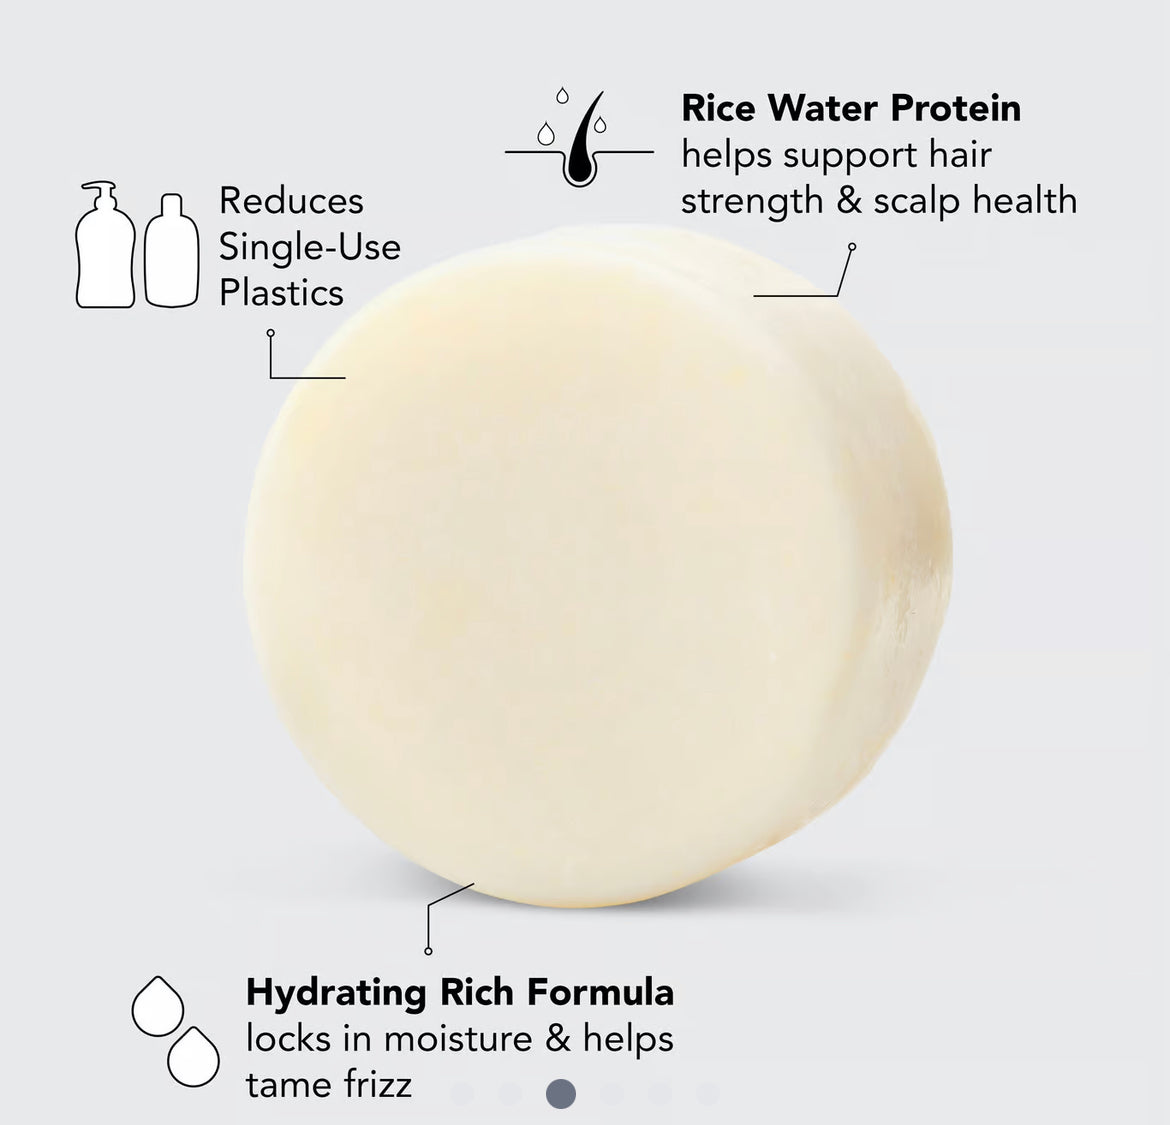 Kitsch Rice Water Conditioner Bar for Hair Growth